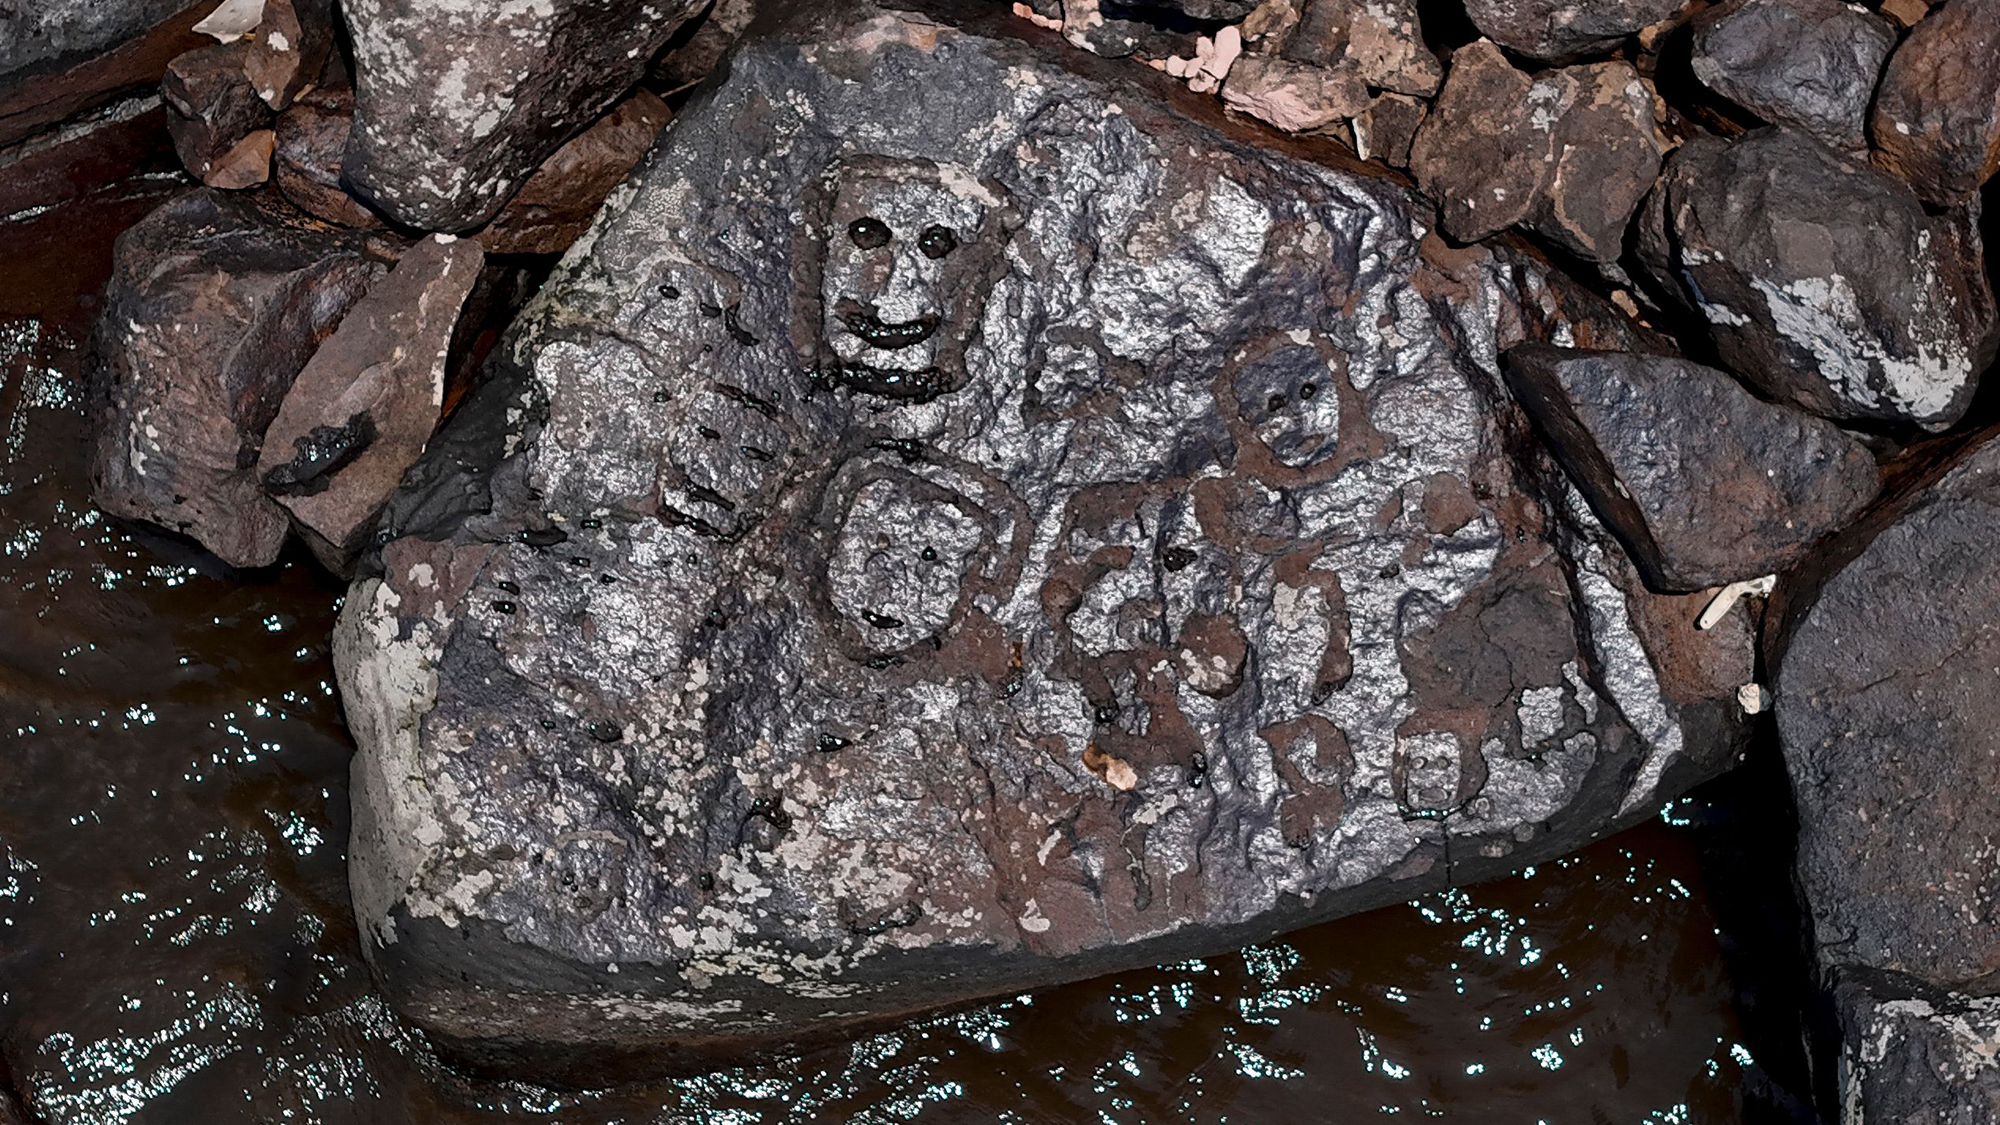 Drought reveals ancient rock carvings of human faces in Brazil